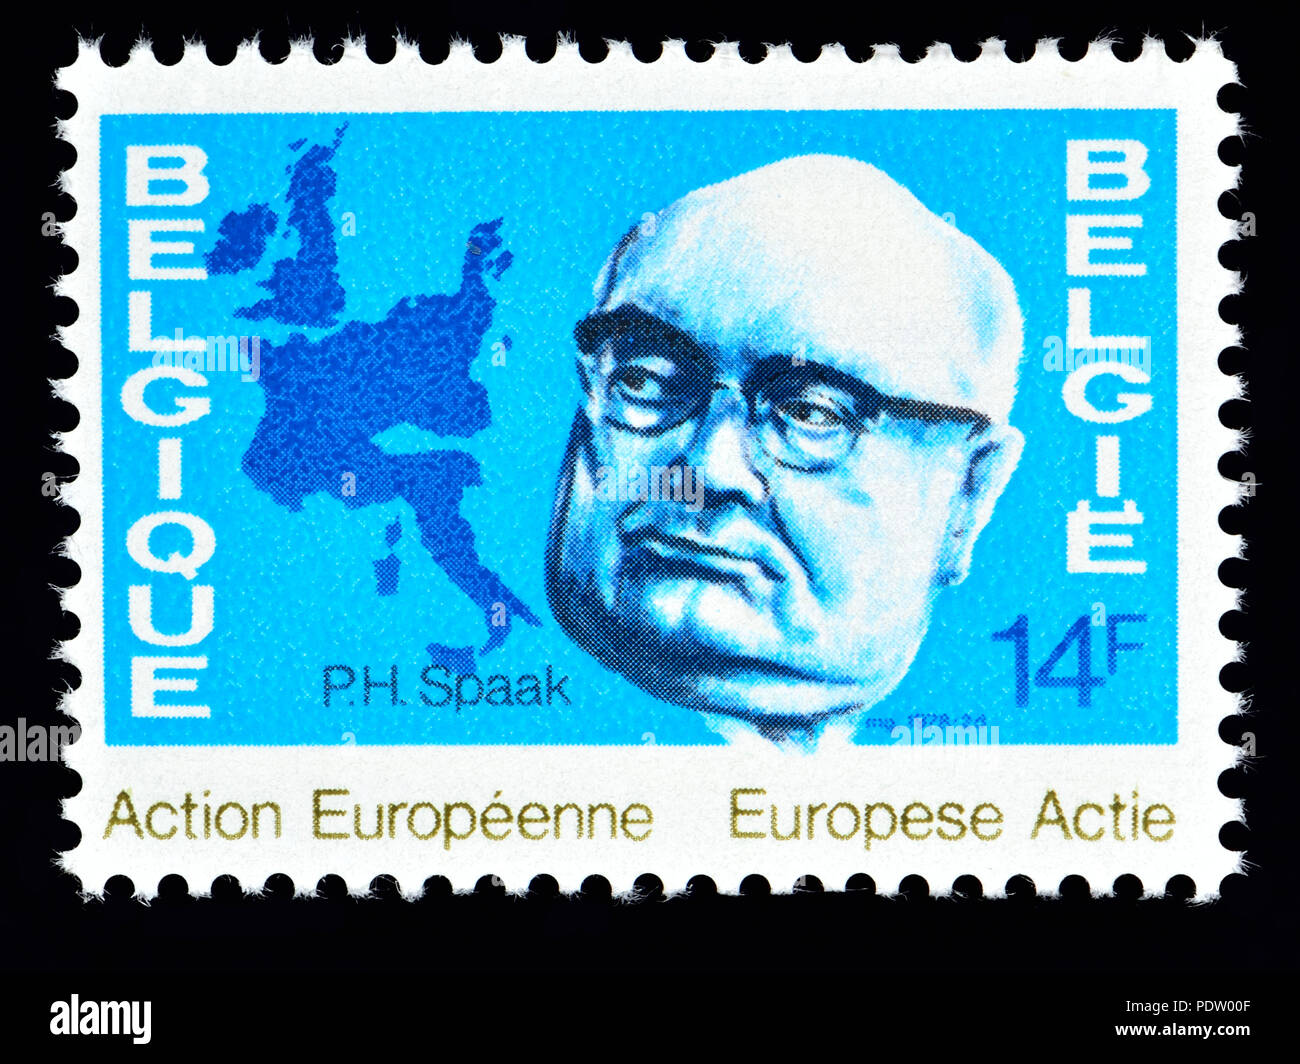 Belgian postage stamp (1978) : Paul-Henri Charles Spaak (1899 – 1972)Belgian politician and statesman considered as one of the founding fathers of the Stock Photo